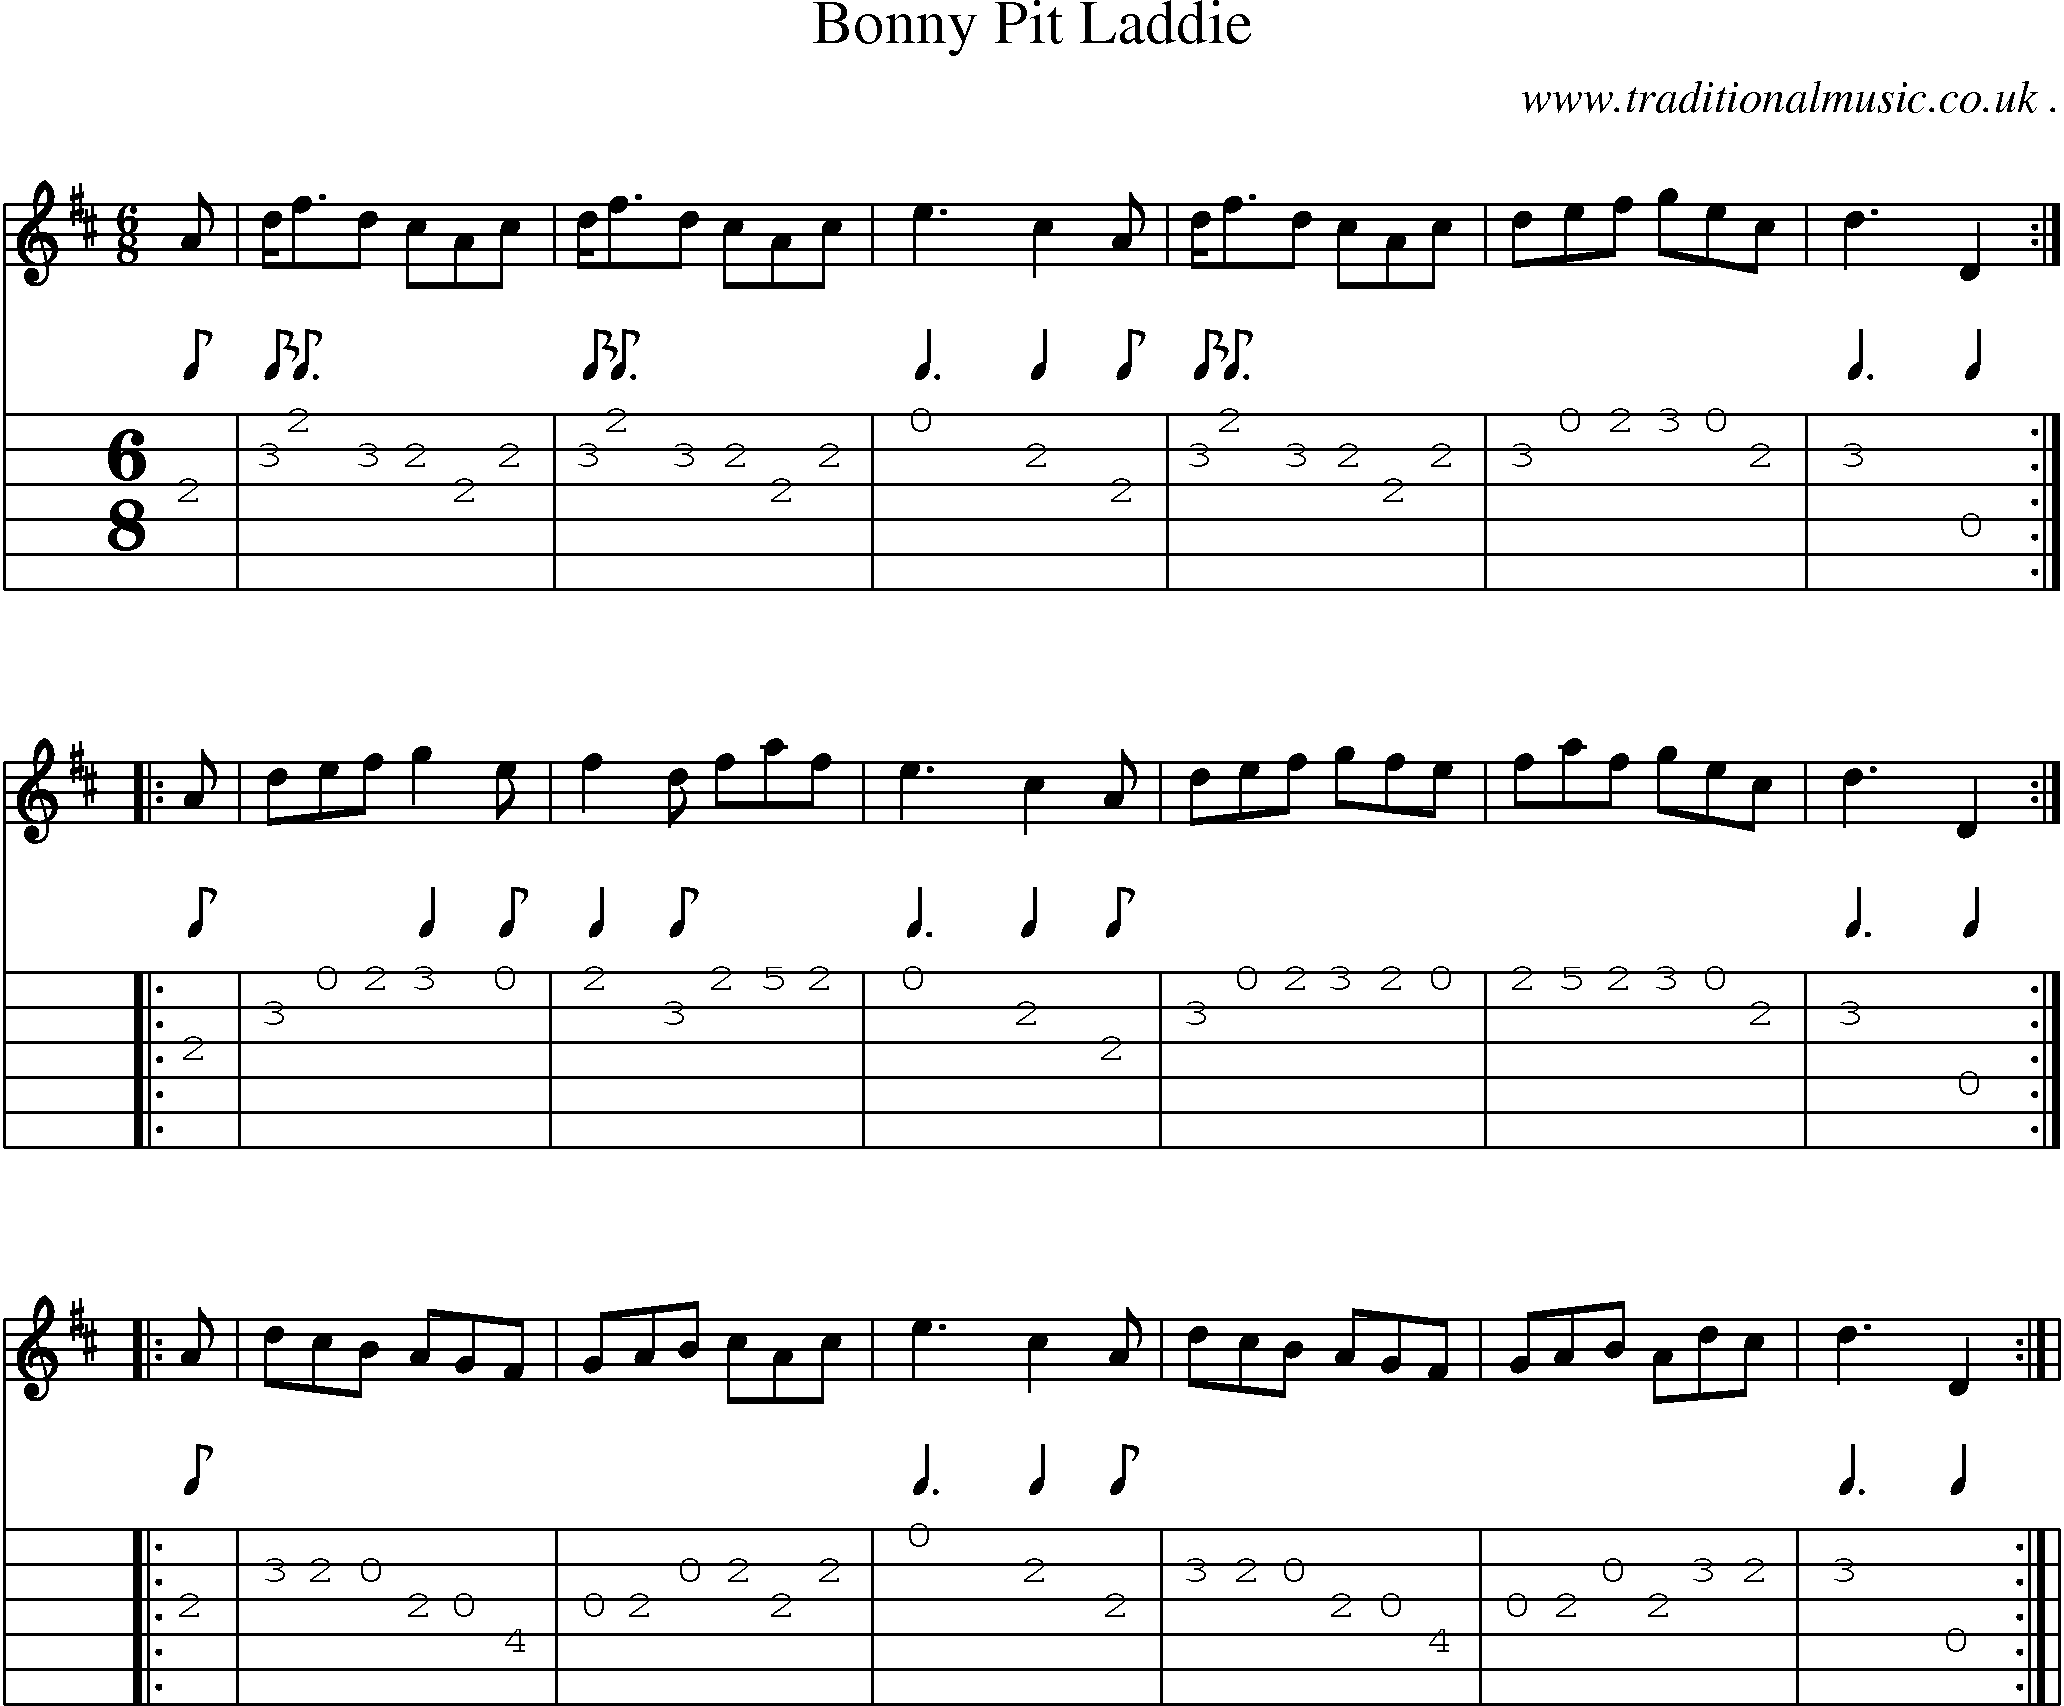 Sheet-Music and Guitar Tabs for Bonny Pit Laddie